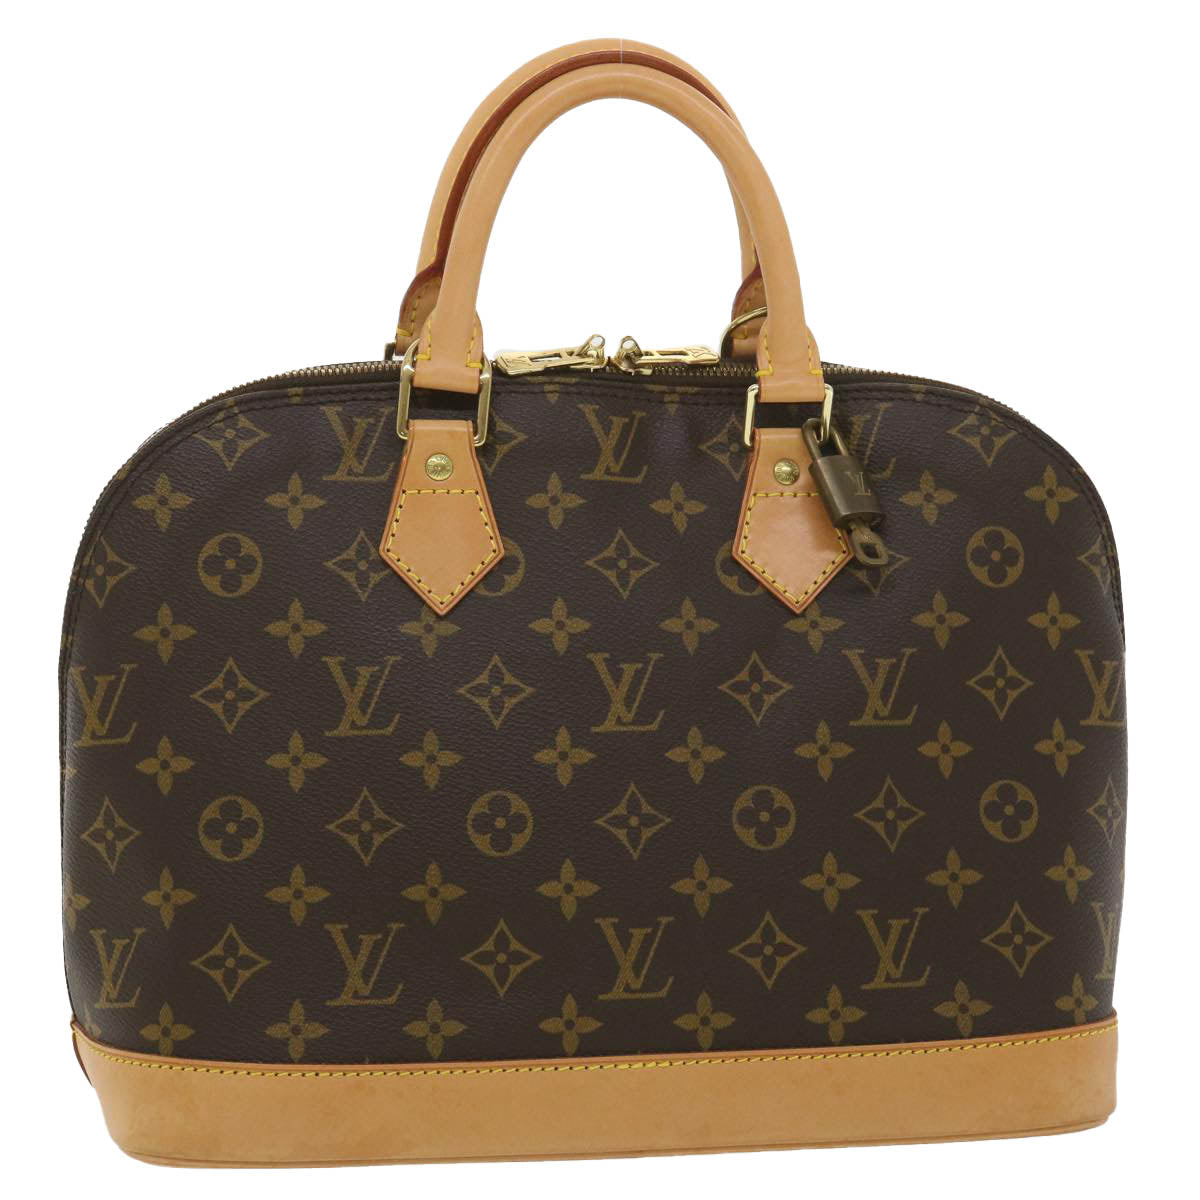 LV. Hand Bags